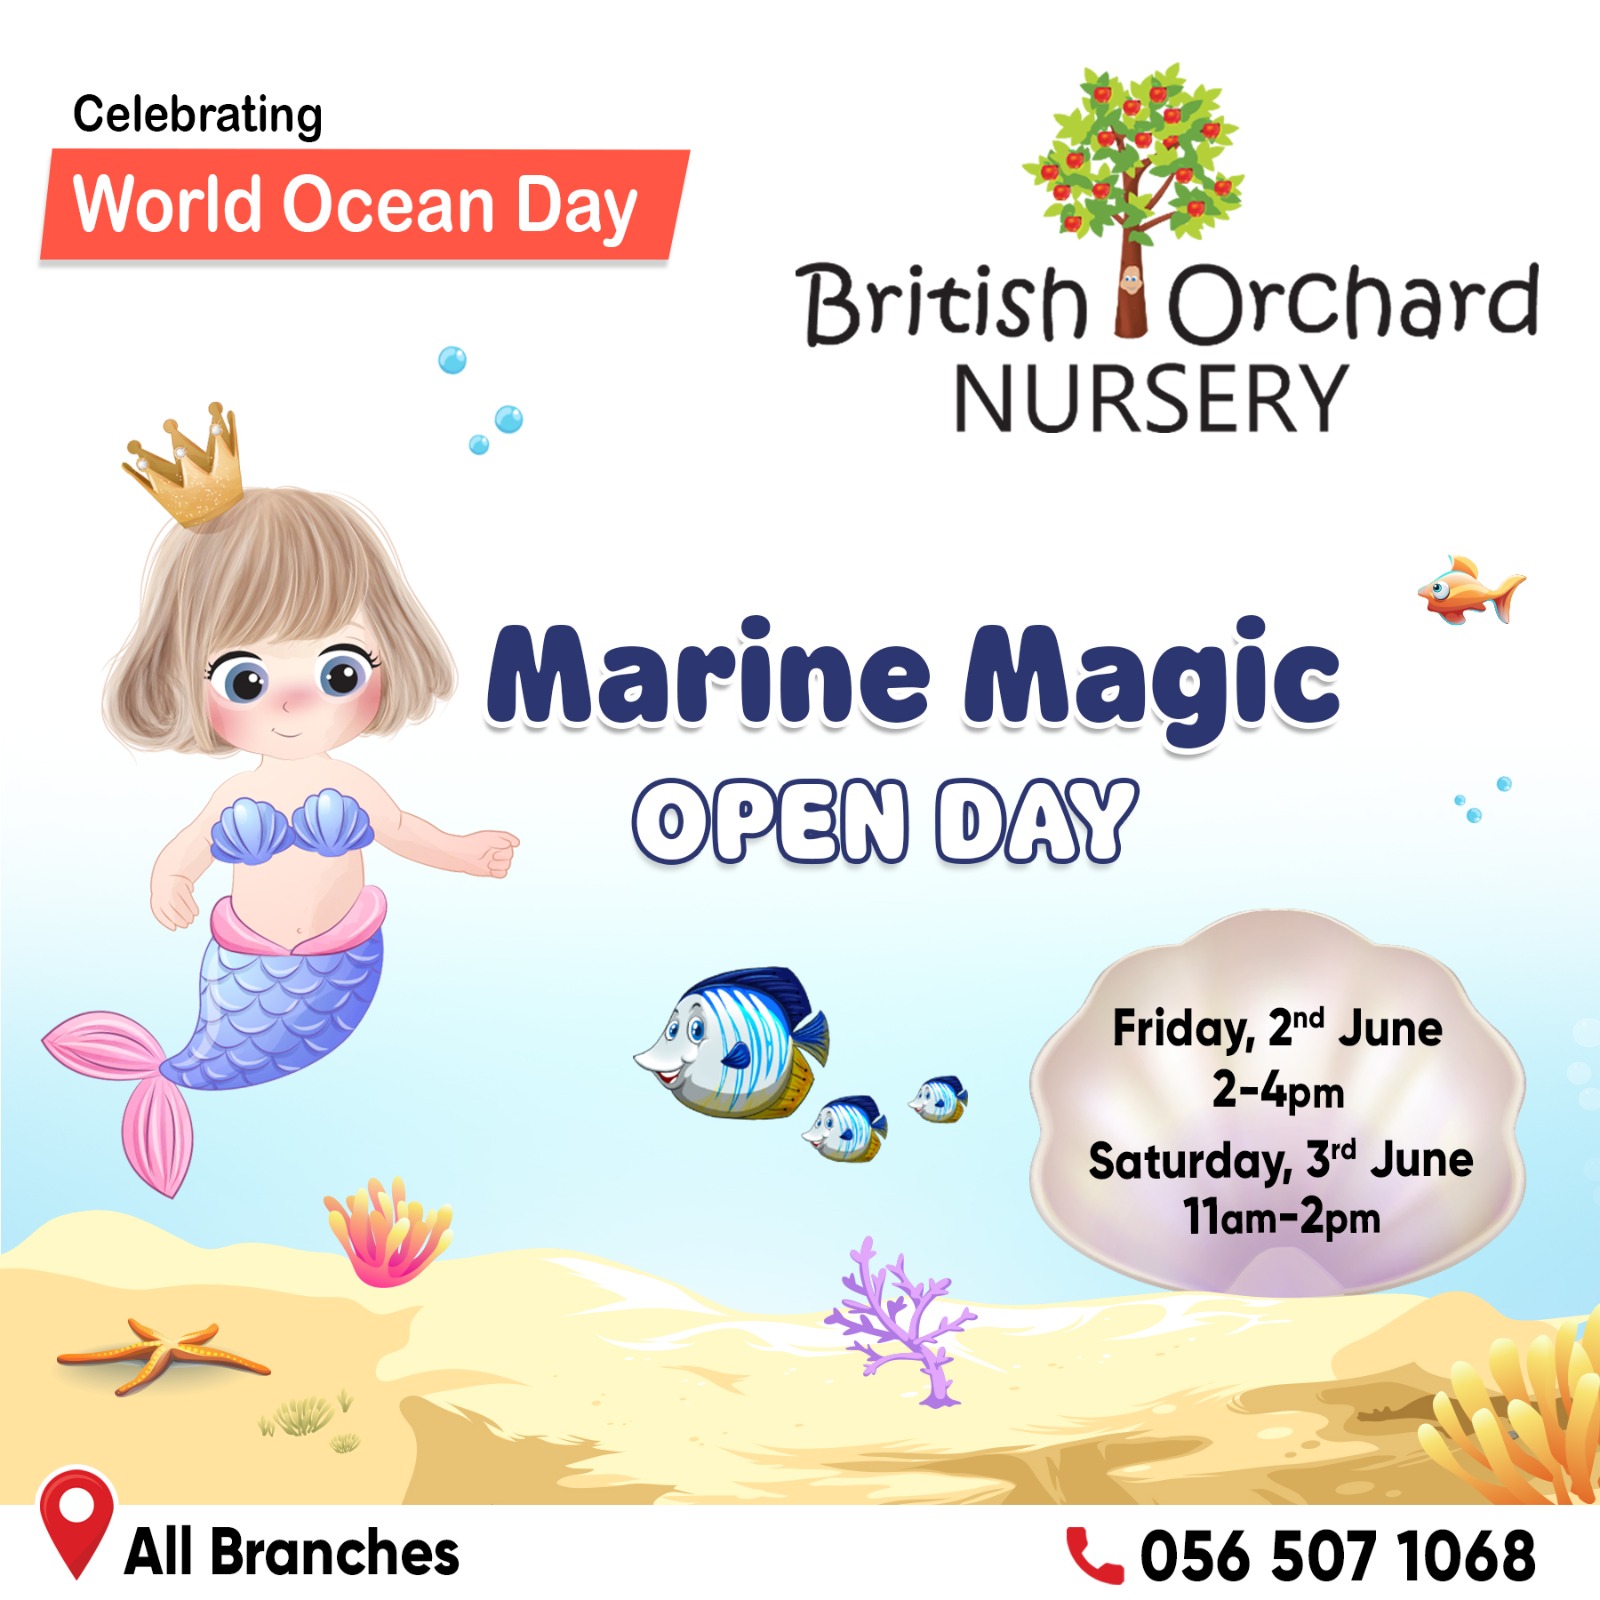 If you're looking for a safe and nurturing Nursery in Dubai for your child, look no further! 🧜🏼‍♀️🌊